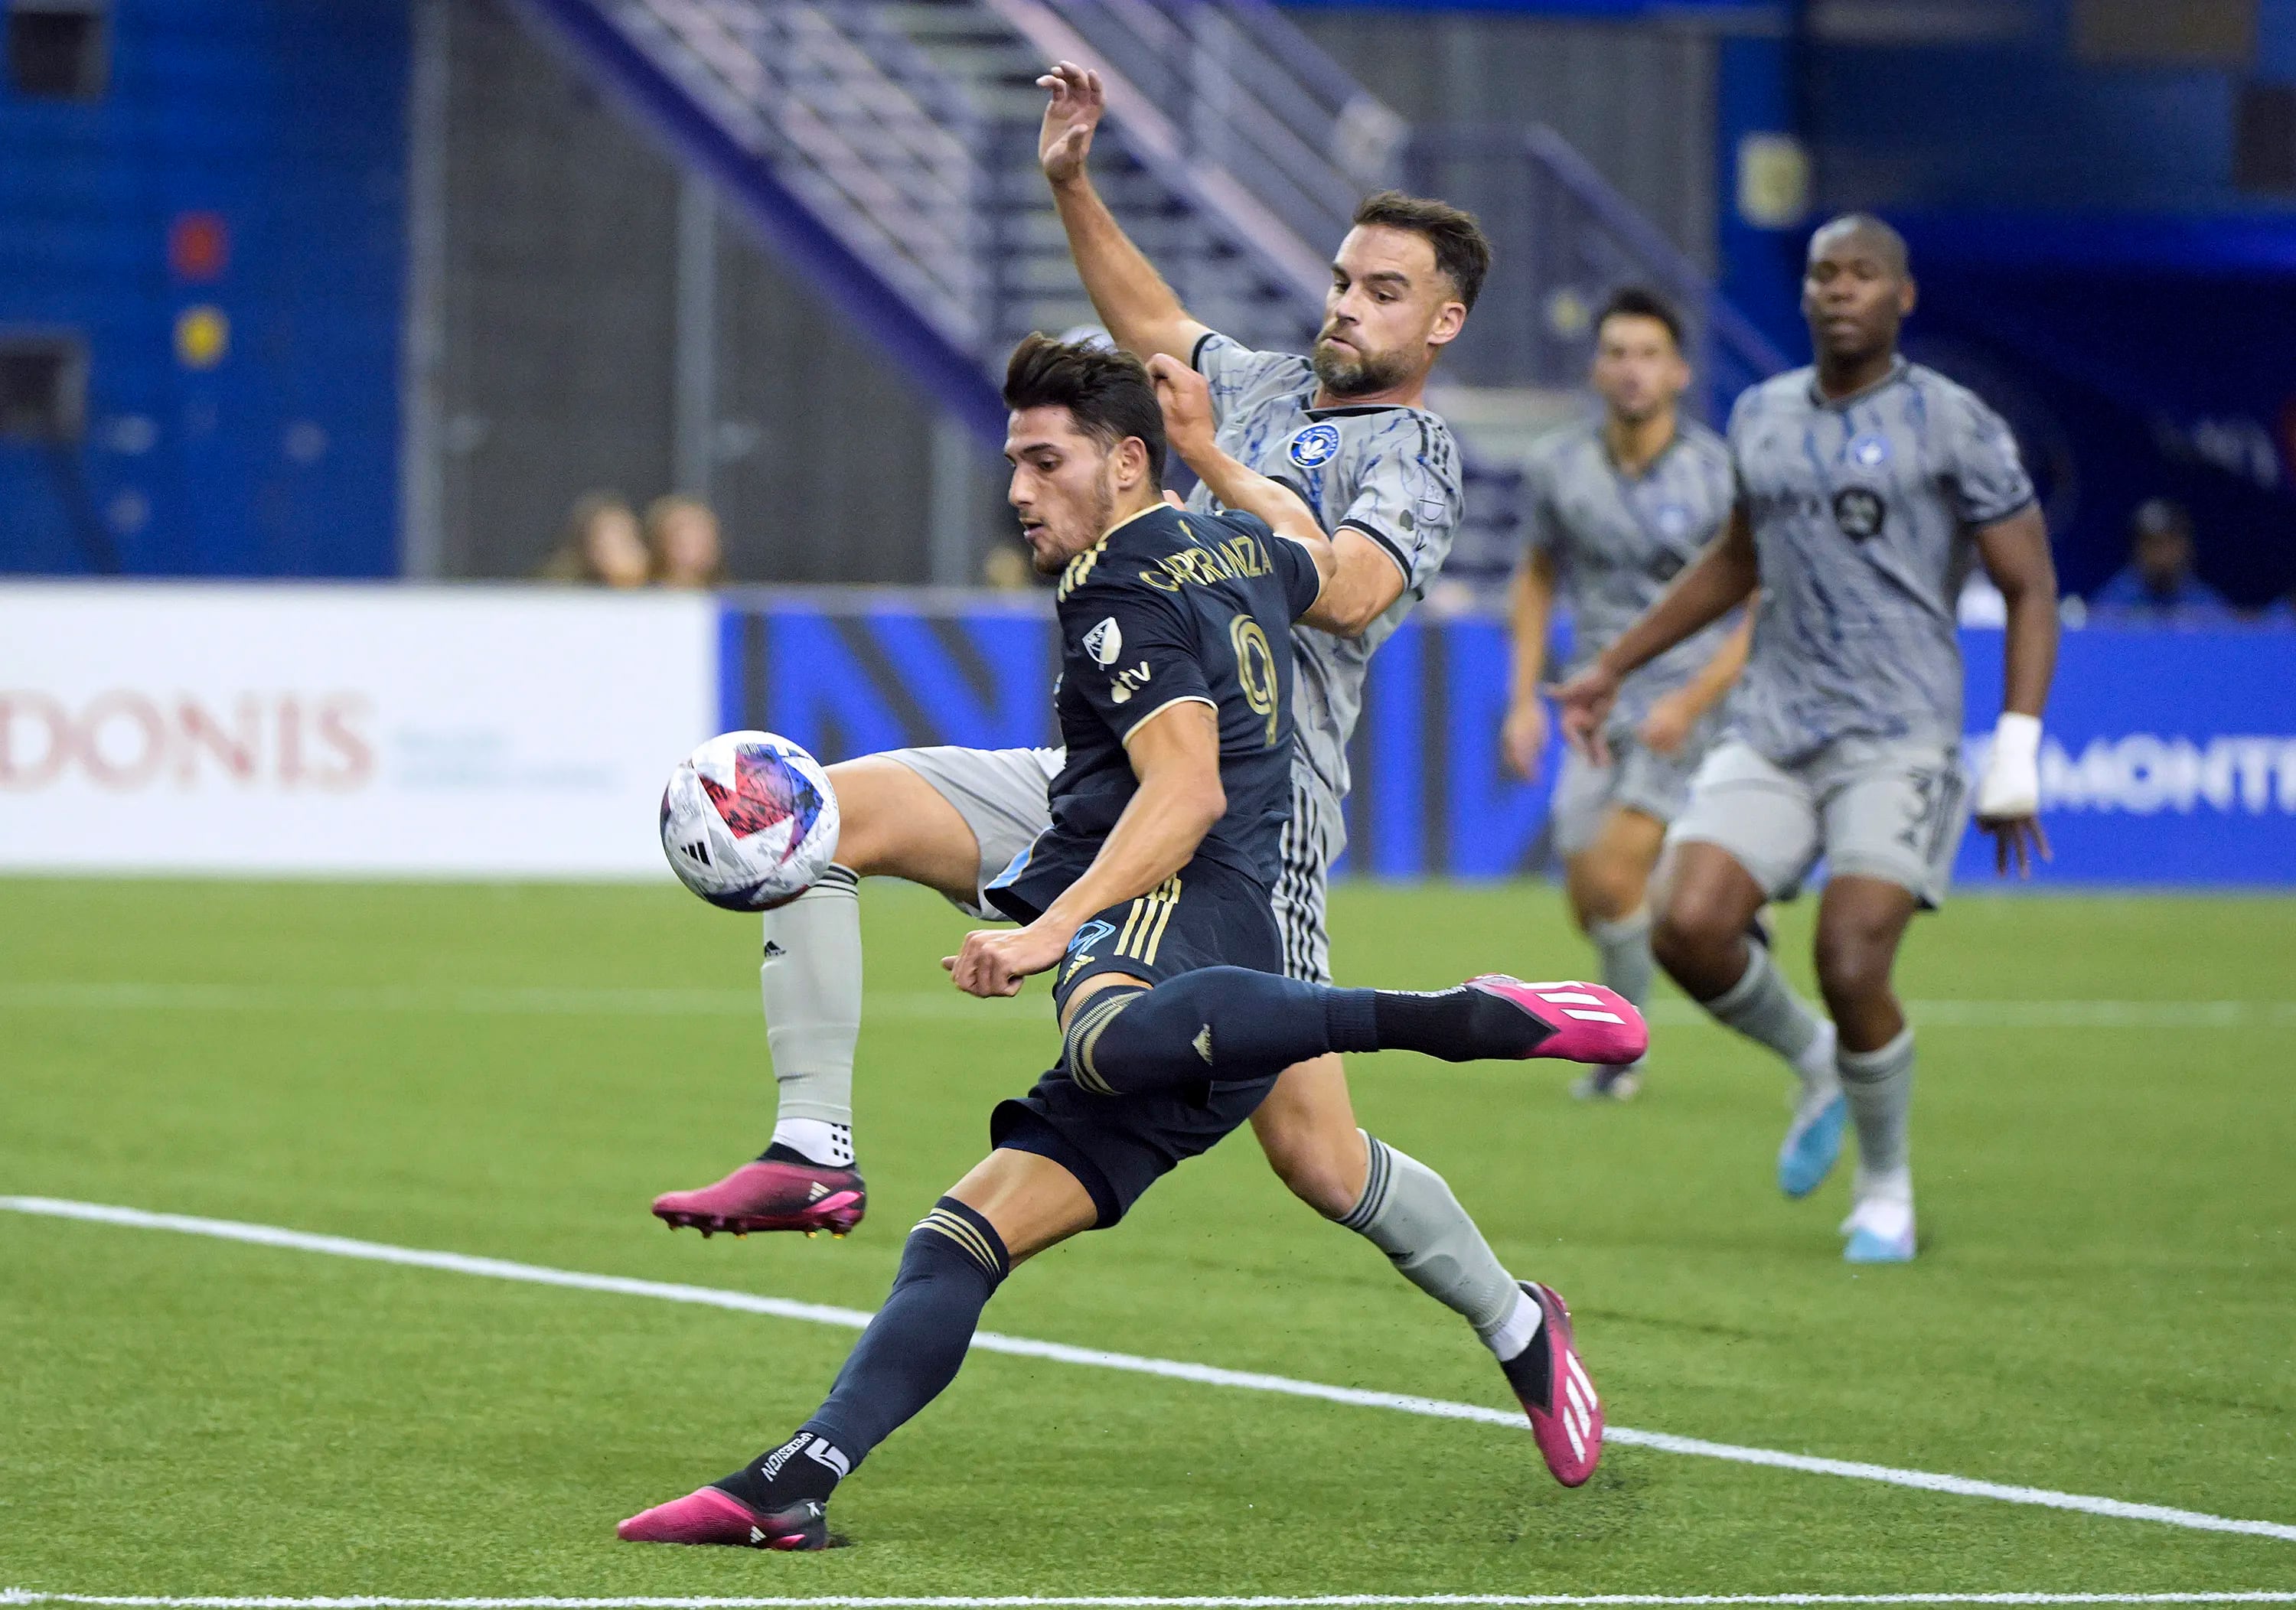 Philadelphia Union's eMLS player competes in FIFA 23 league - WHYY